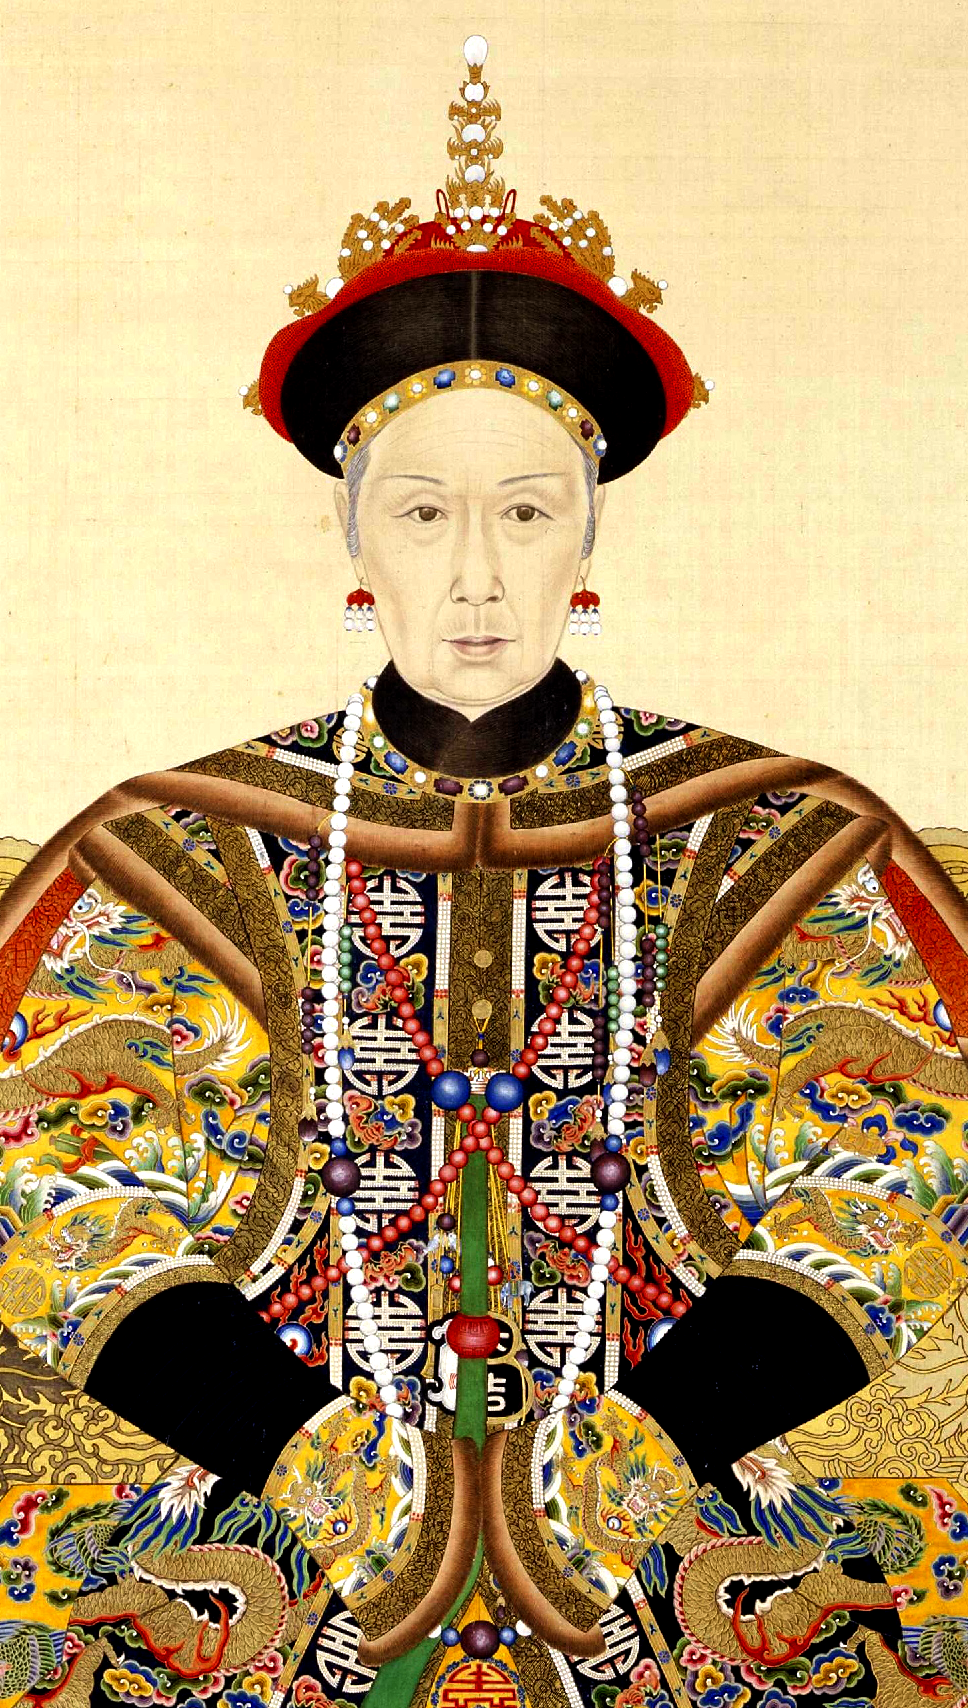 Fichier:The Imperial Portrait of the Ci-Xi Imperial Dowager Empress.PNG